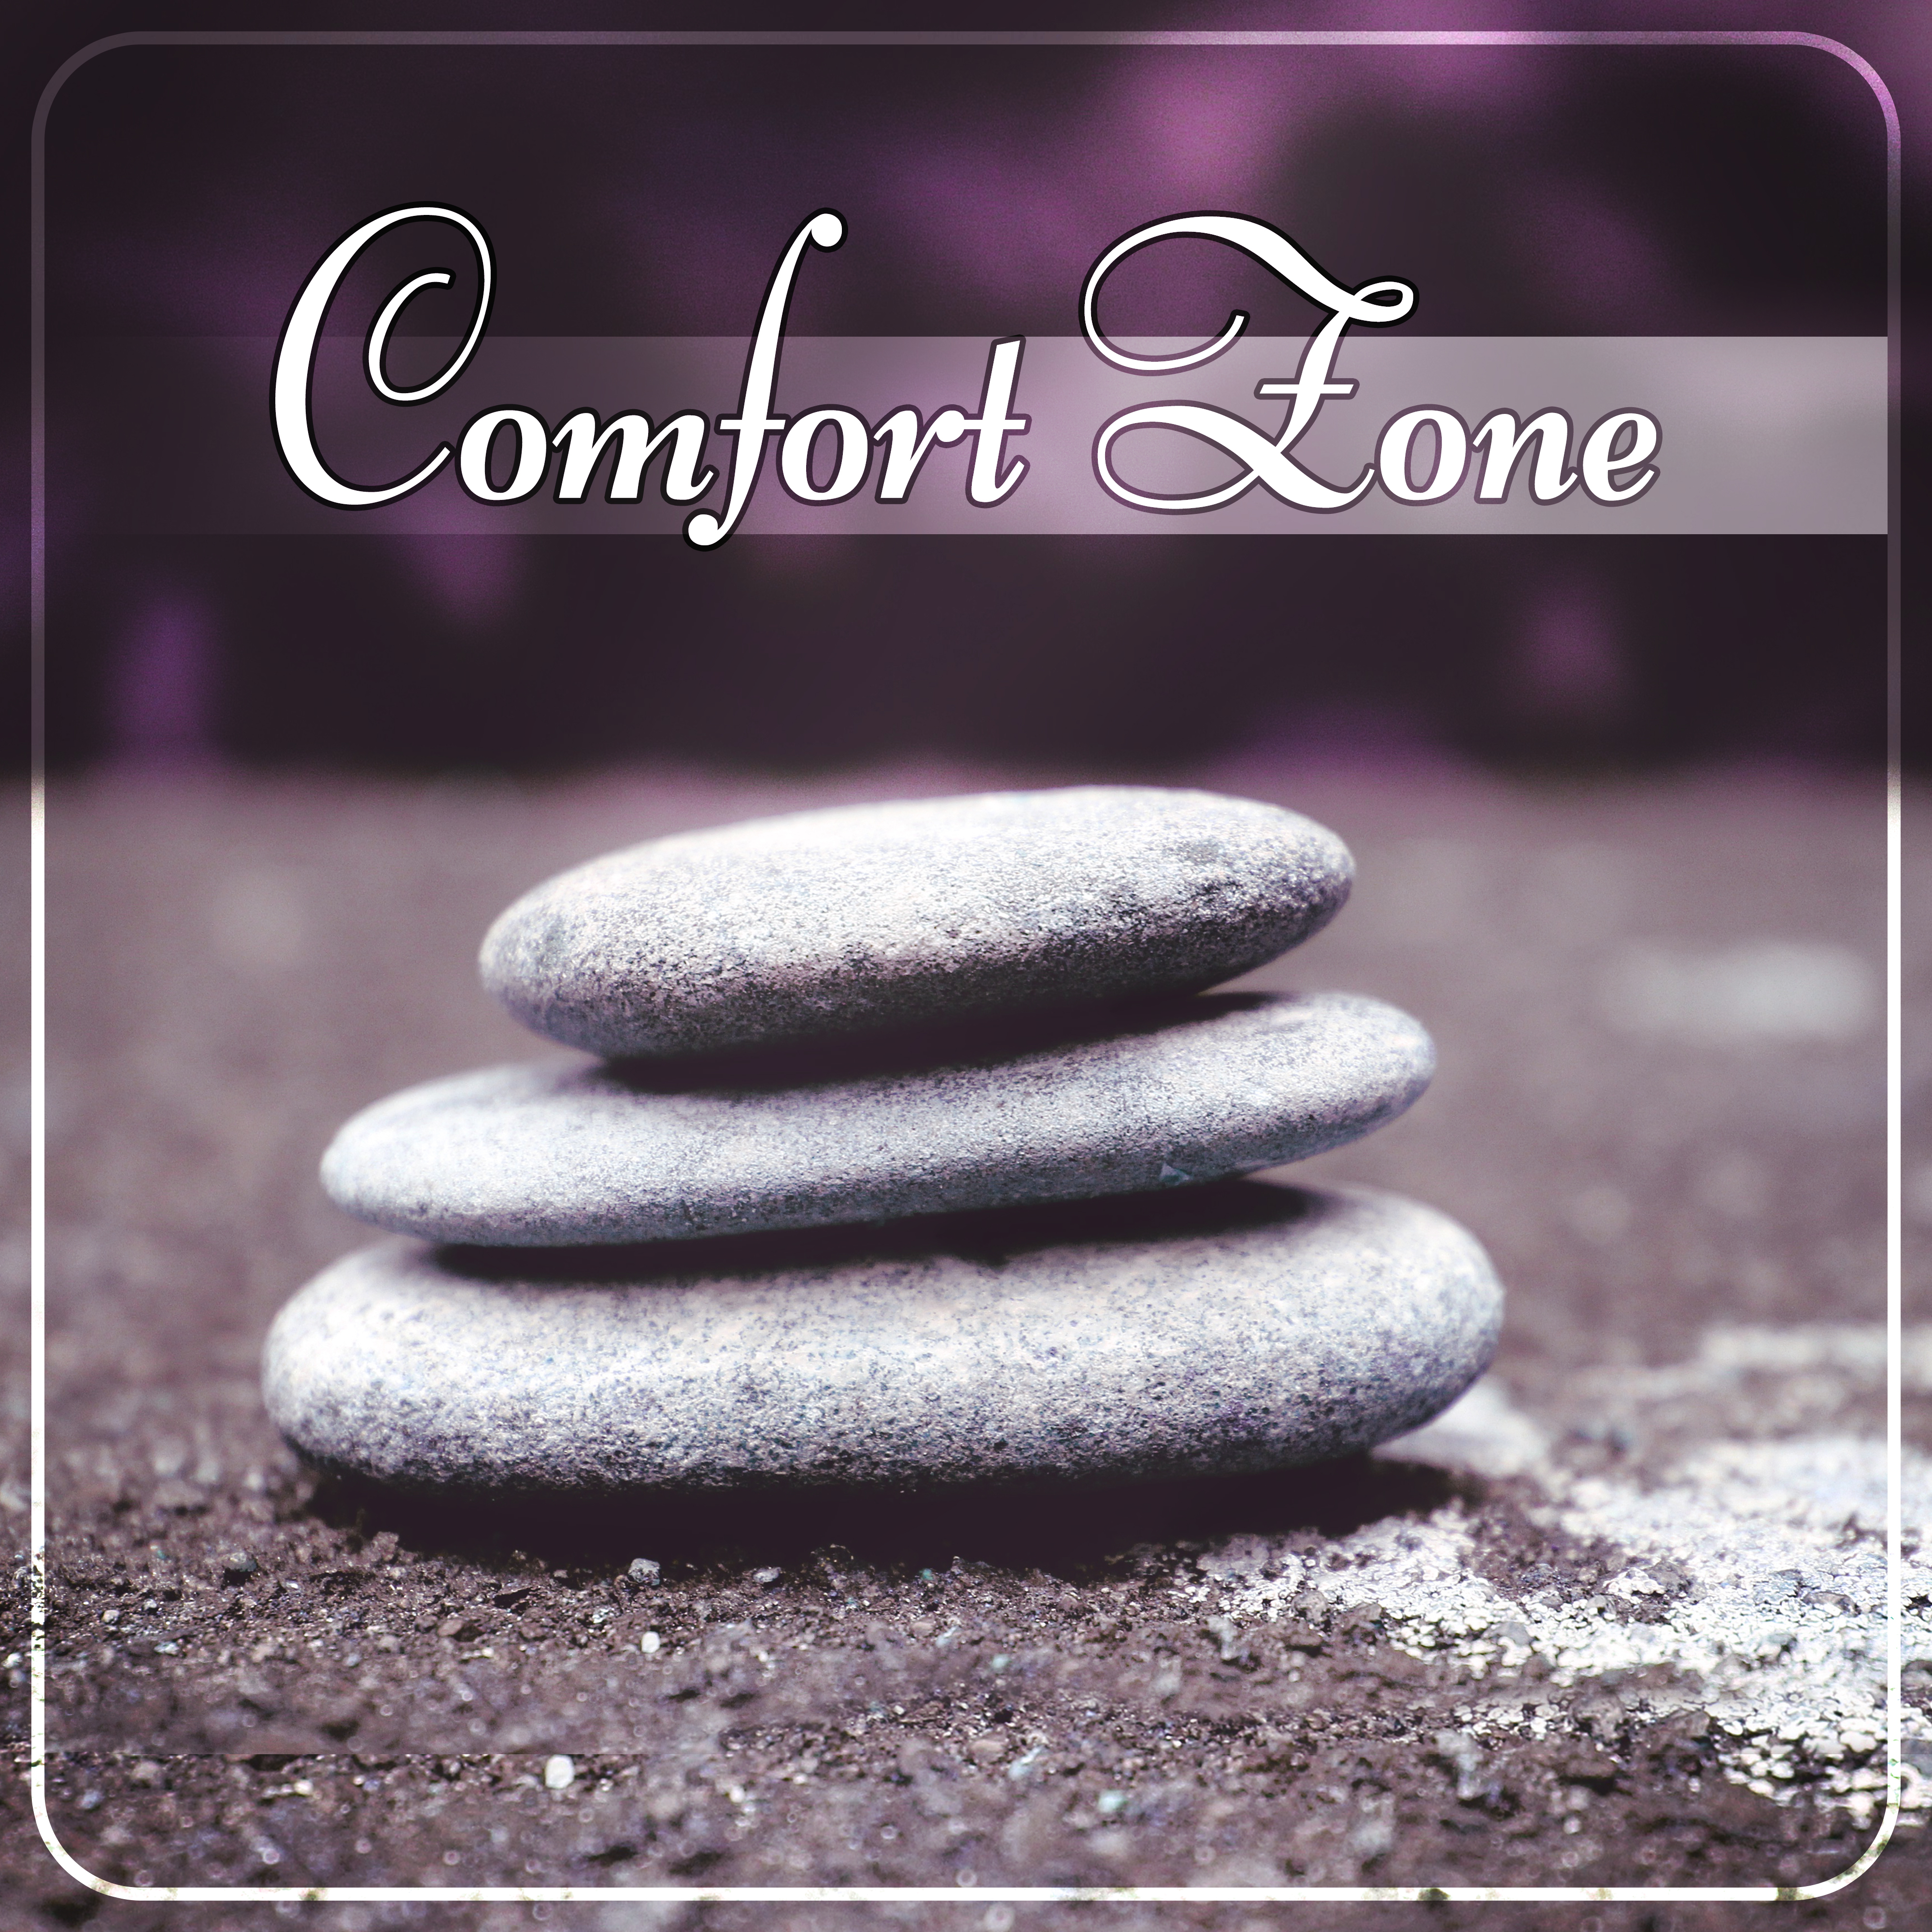 Comfort Zone  Calming Sounds for Peace of Mind, Yoga Music, Mindfulness Meditation, Zen Music, Reiki Healing, Mantras, Harmony  Serenity